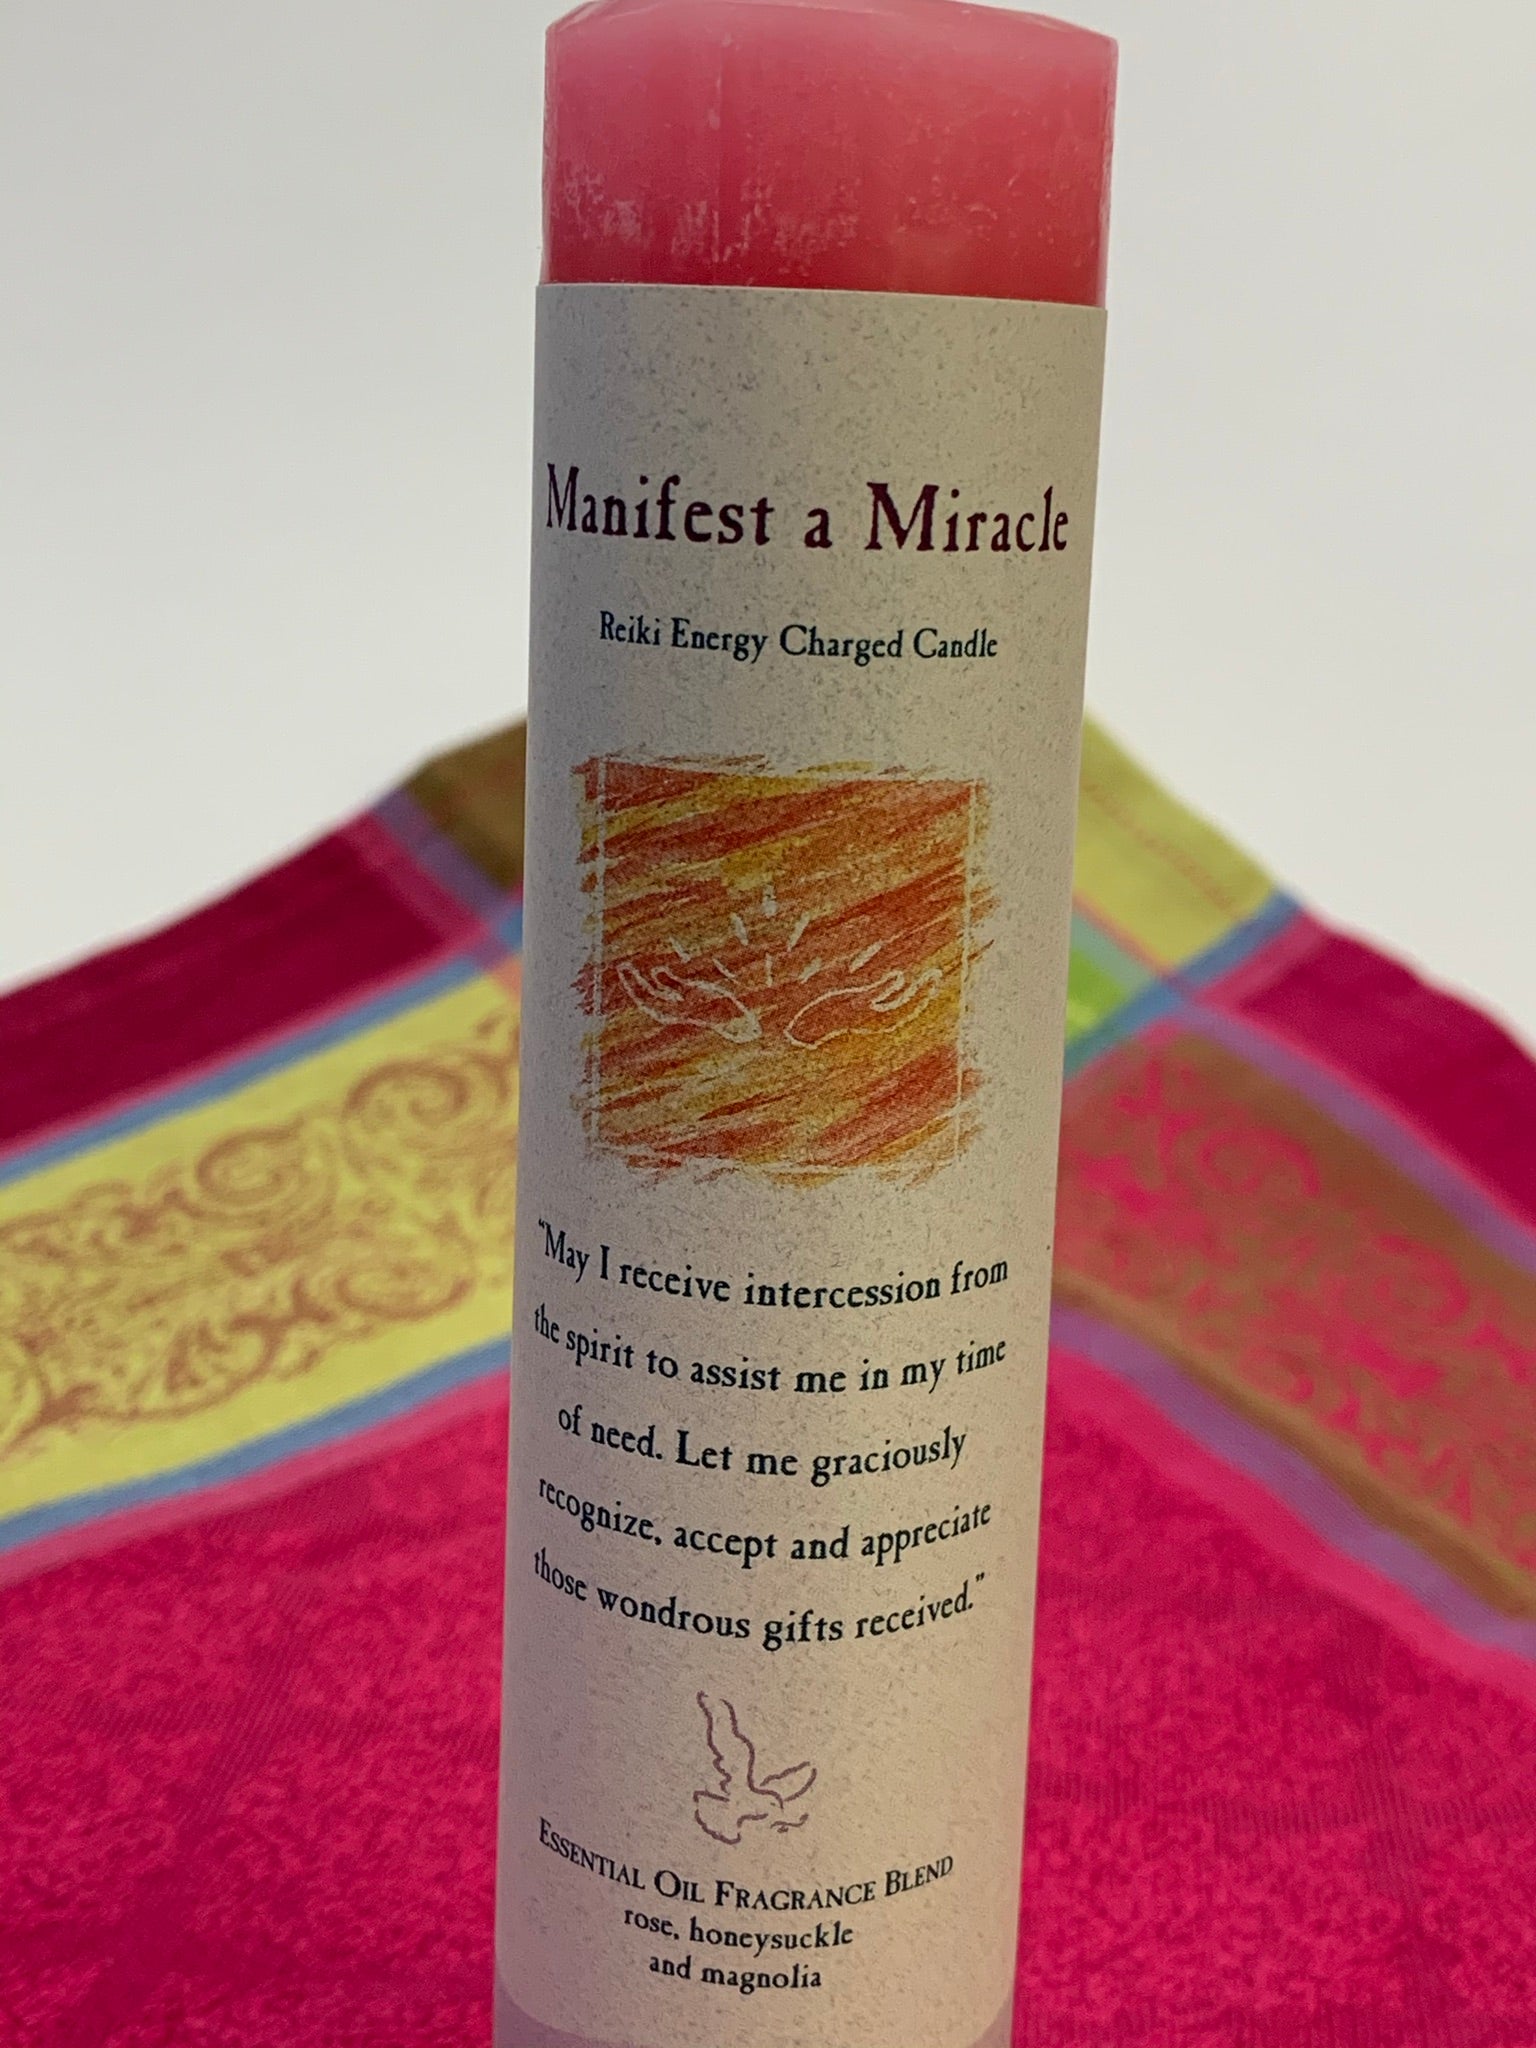 Close-up view of the Reiki-charged pillar candle for "manifesting a miracle." It is handcrafted and scented using essential oils. An affirmation/prayer is printed on the label, as well as a listing of the essential oils used (rose, honeysuckle & magnolia). It is approximately 7"x1½." Perfect for meditation, prayer, visualization or quiet time. This pink candle and its label are both visually appealing.